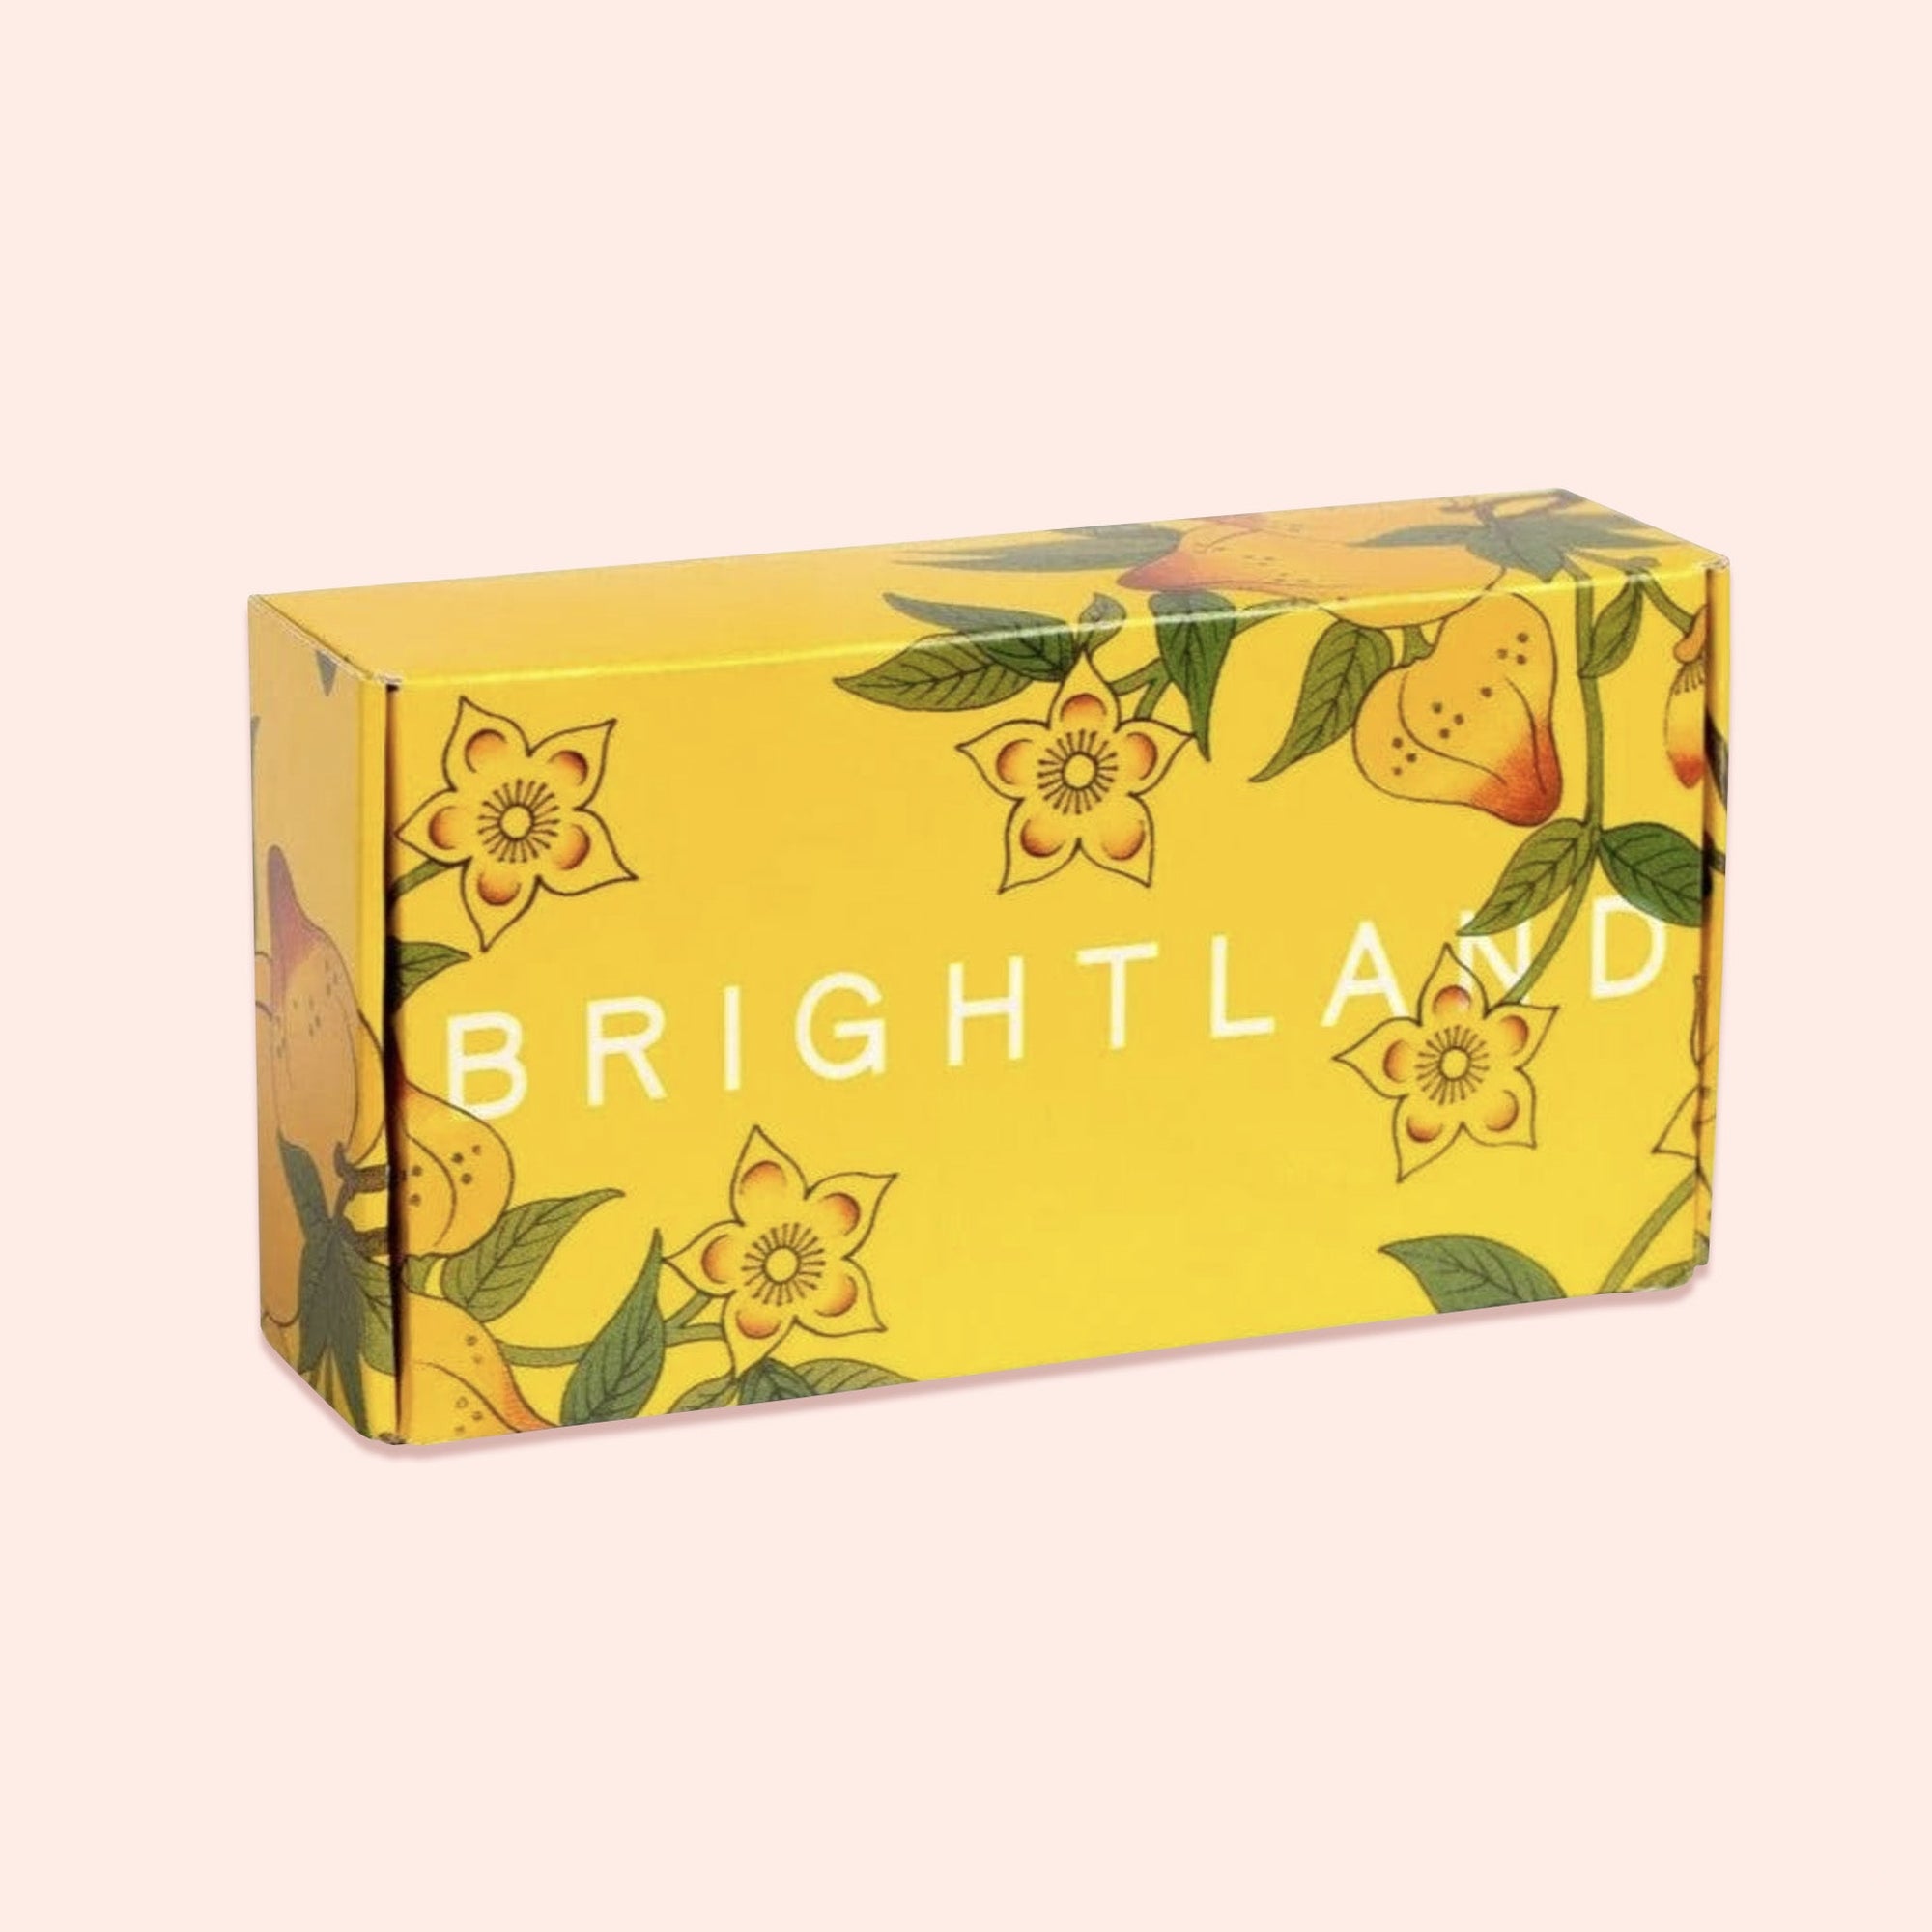 On a light pink background sits an BOX. This yellow box has colorful illustrations of flowers and leaves it says "BRIGHTLAND" in white lettering.